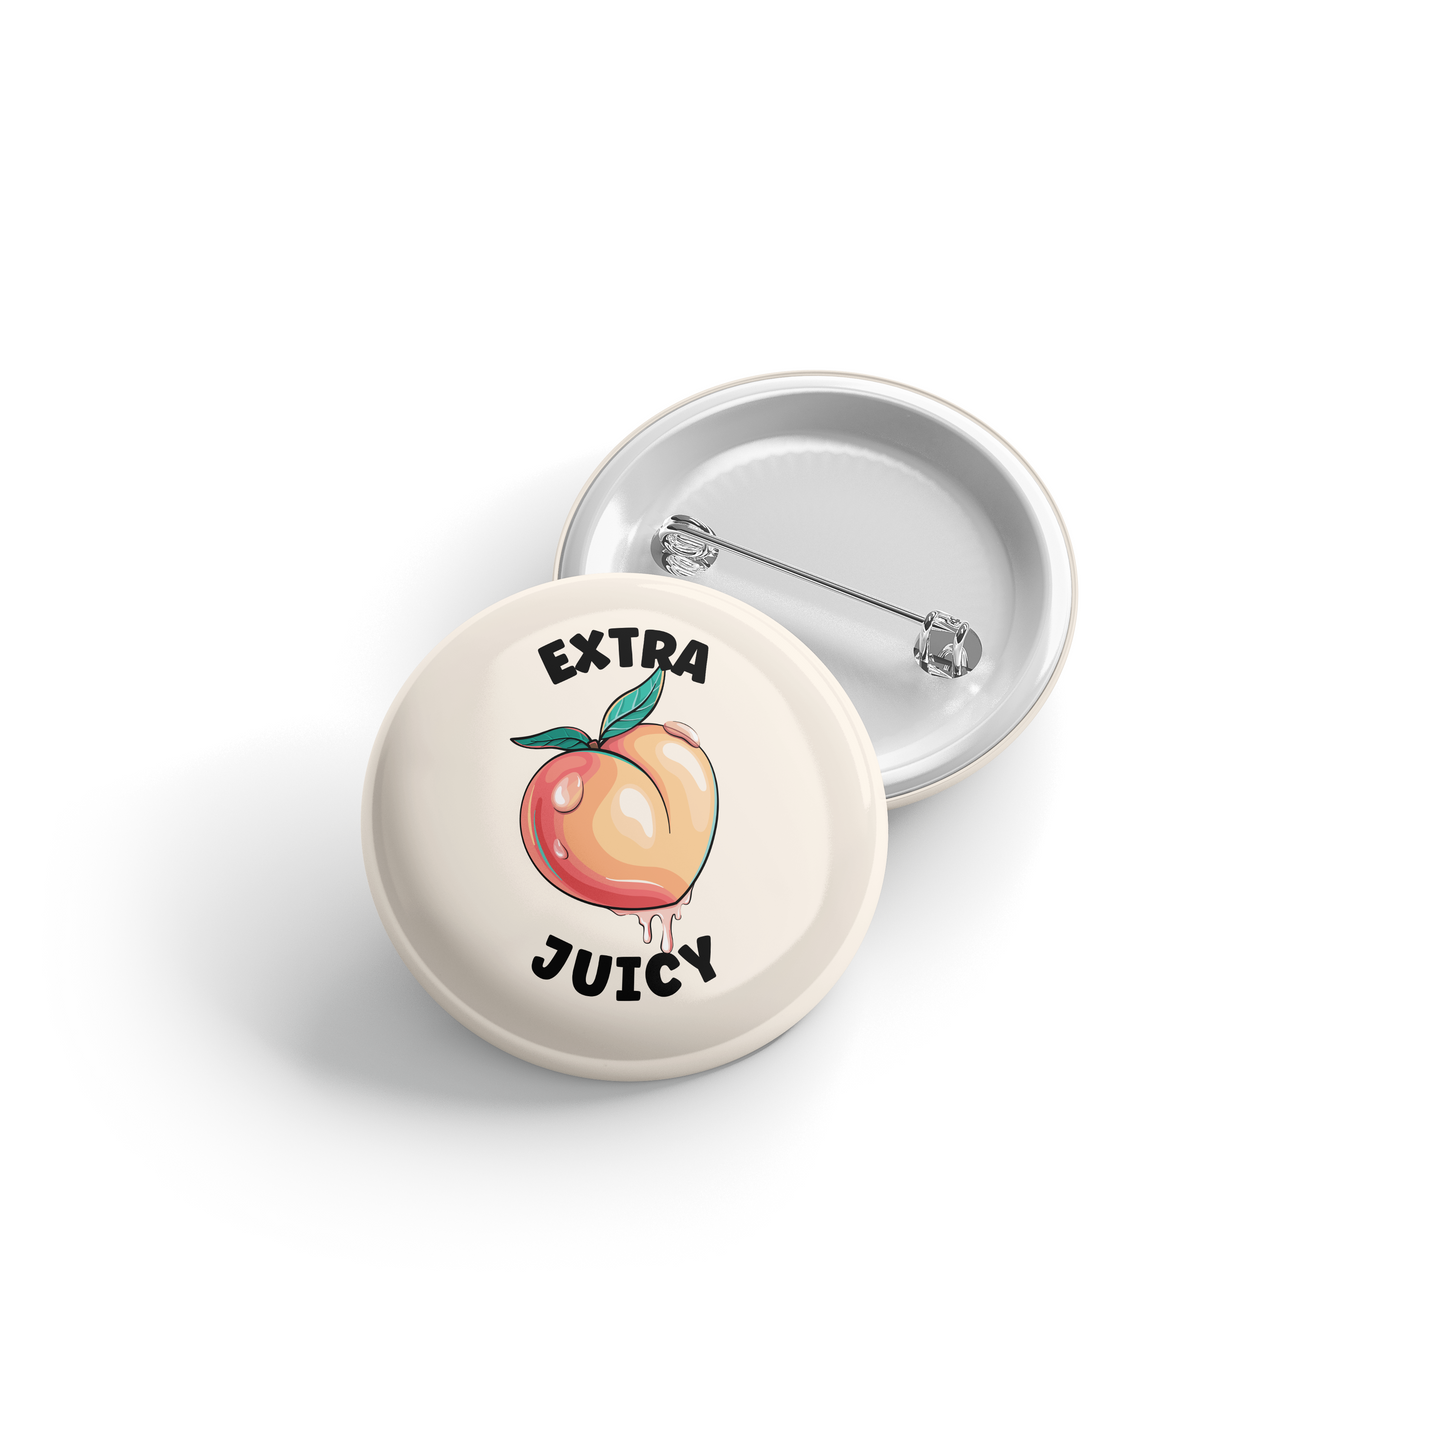 Extra Juicy - Button